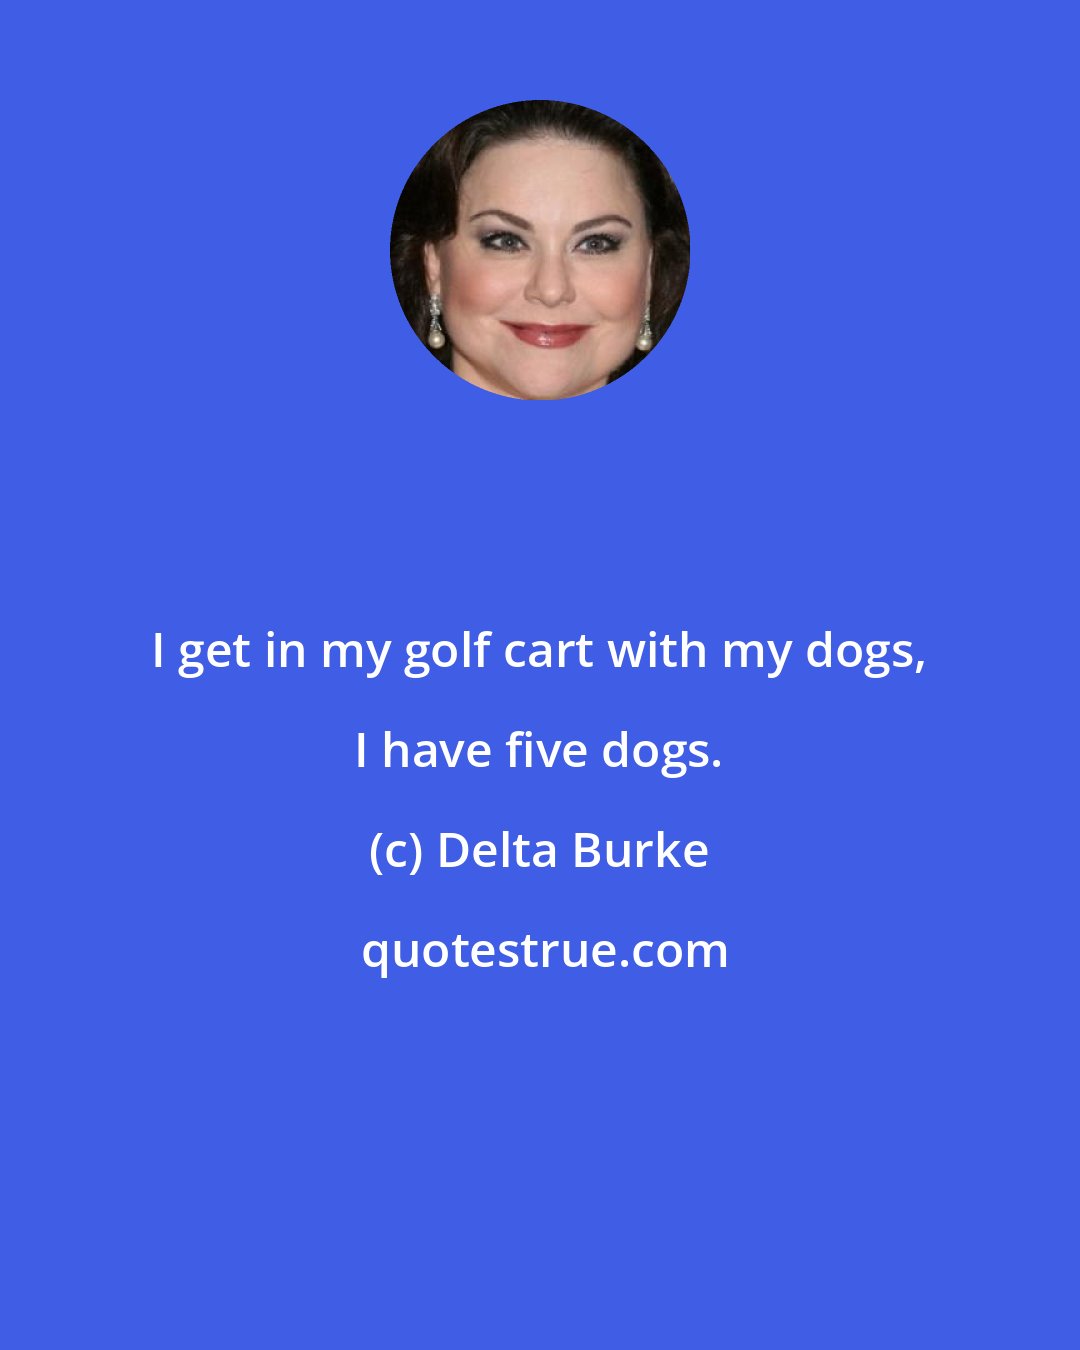 Delta Burke: I get in my golf cart with my dogs, I have five dogs.